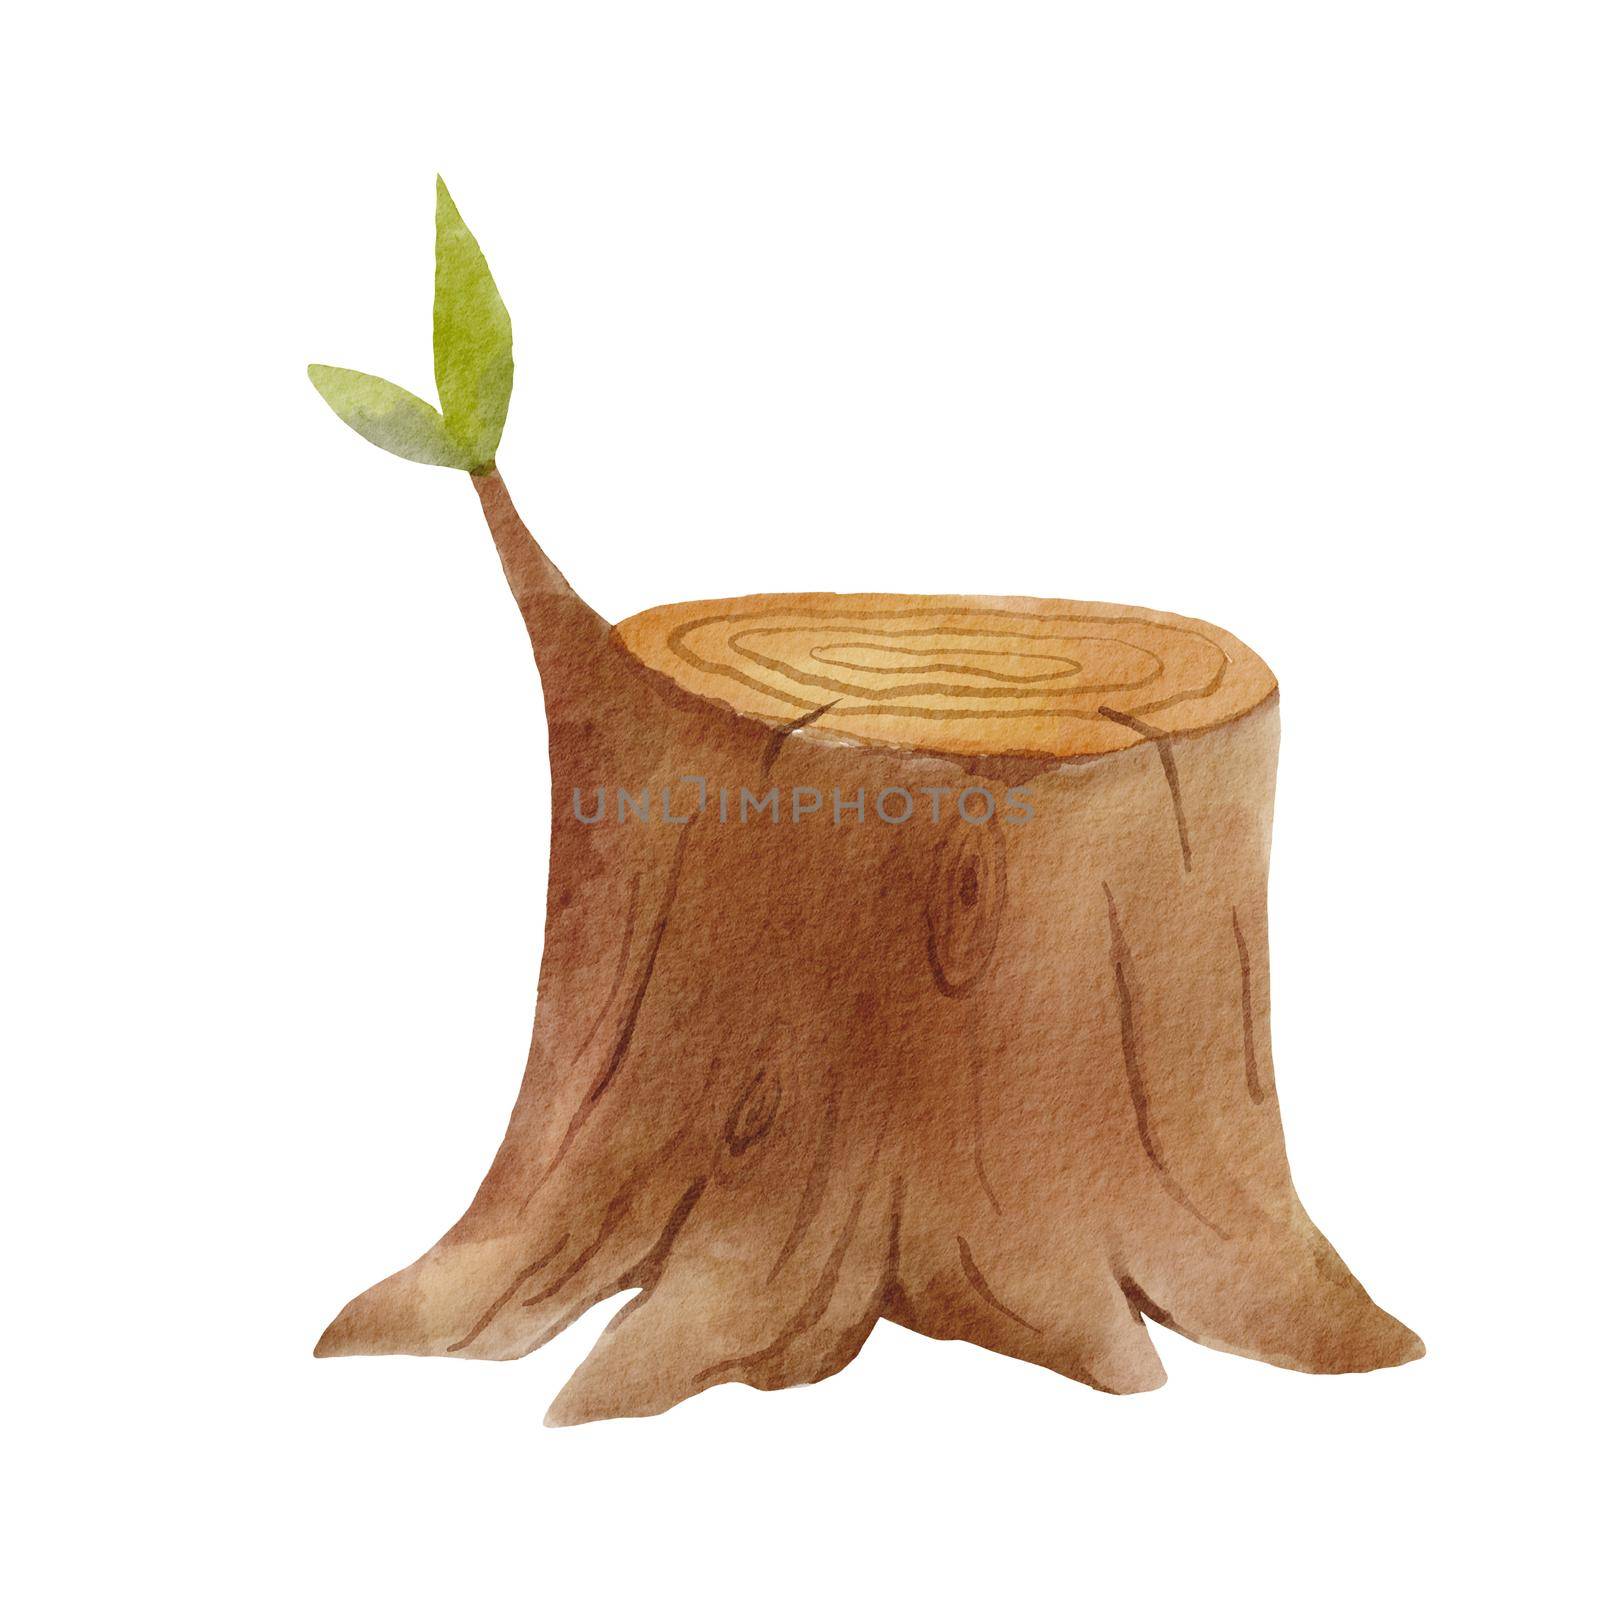 Stump with green leaf. Watercolor piece of wood. Drawing cartoon Isolated on white background.